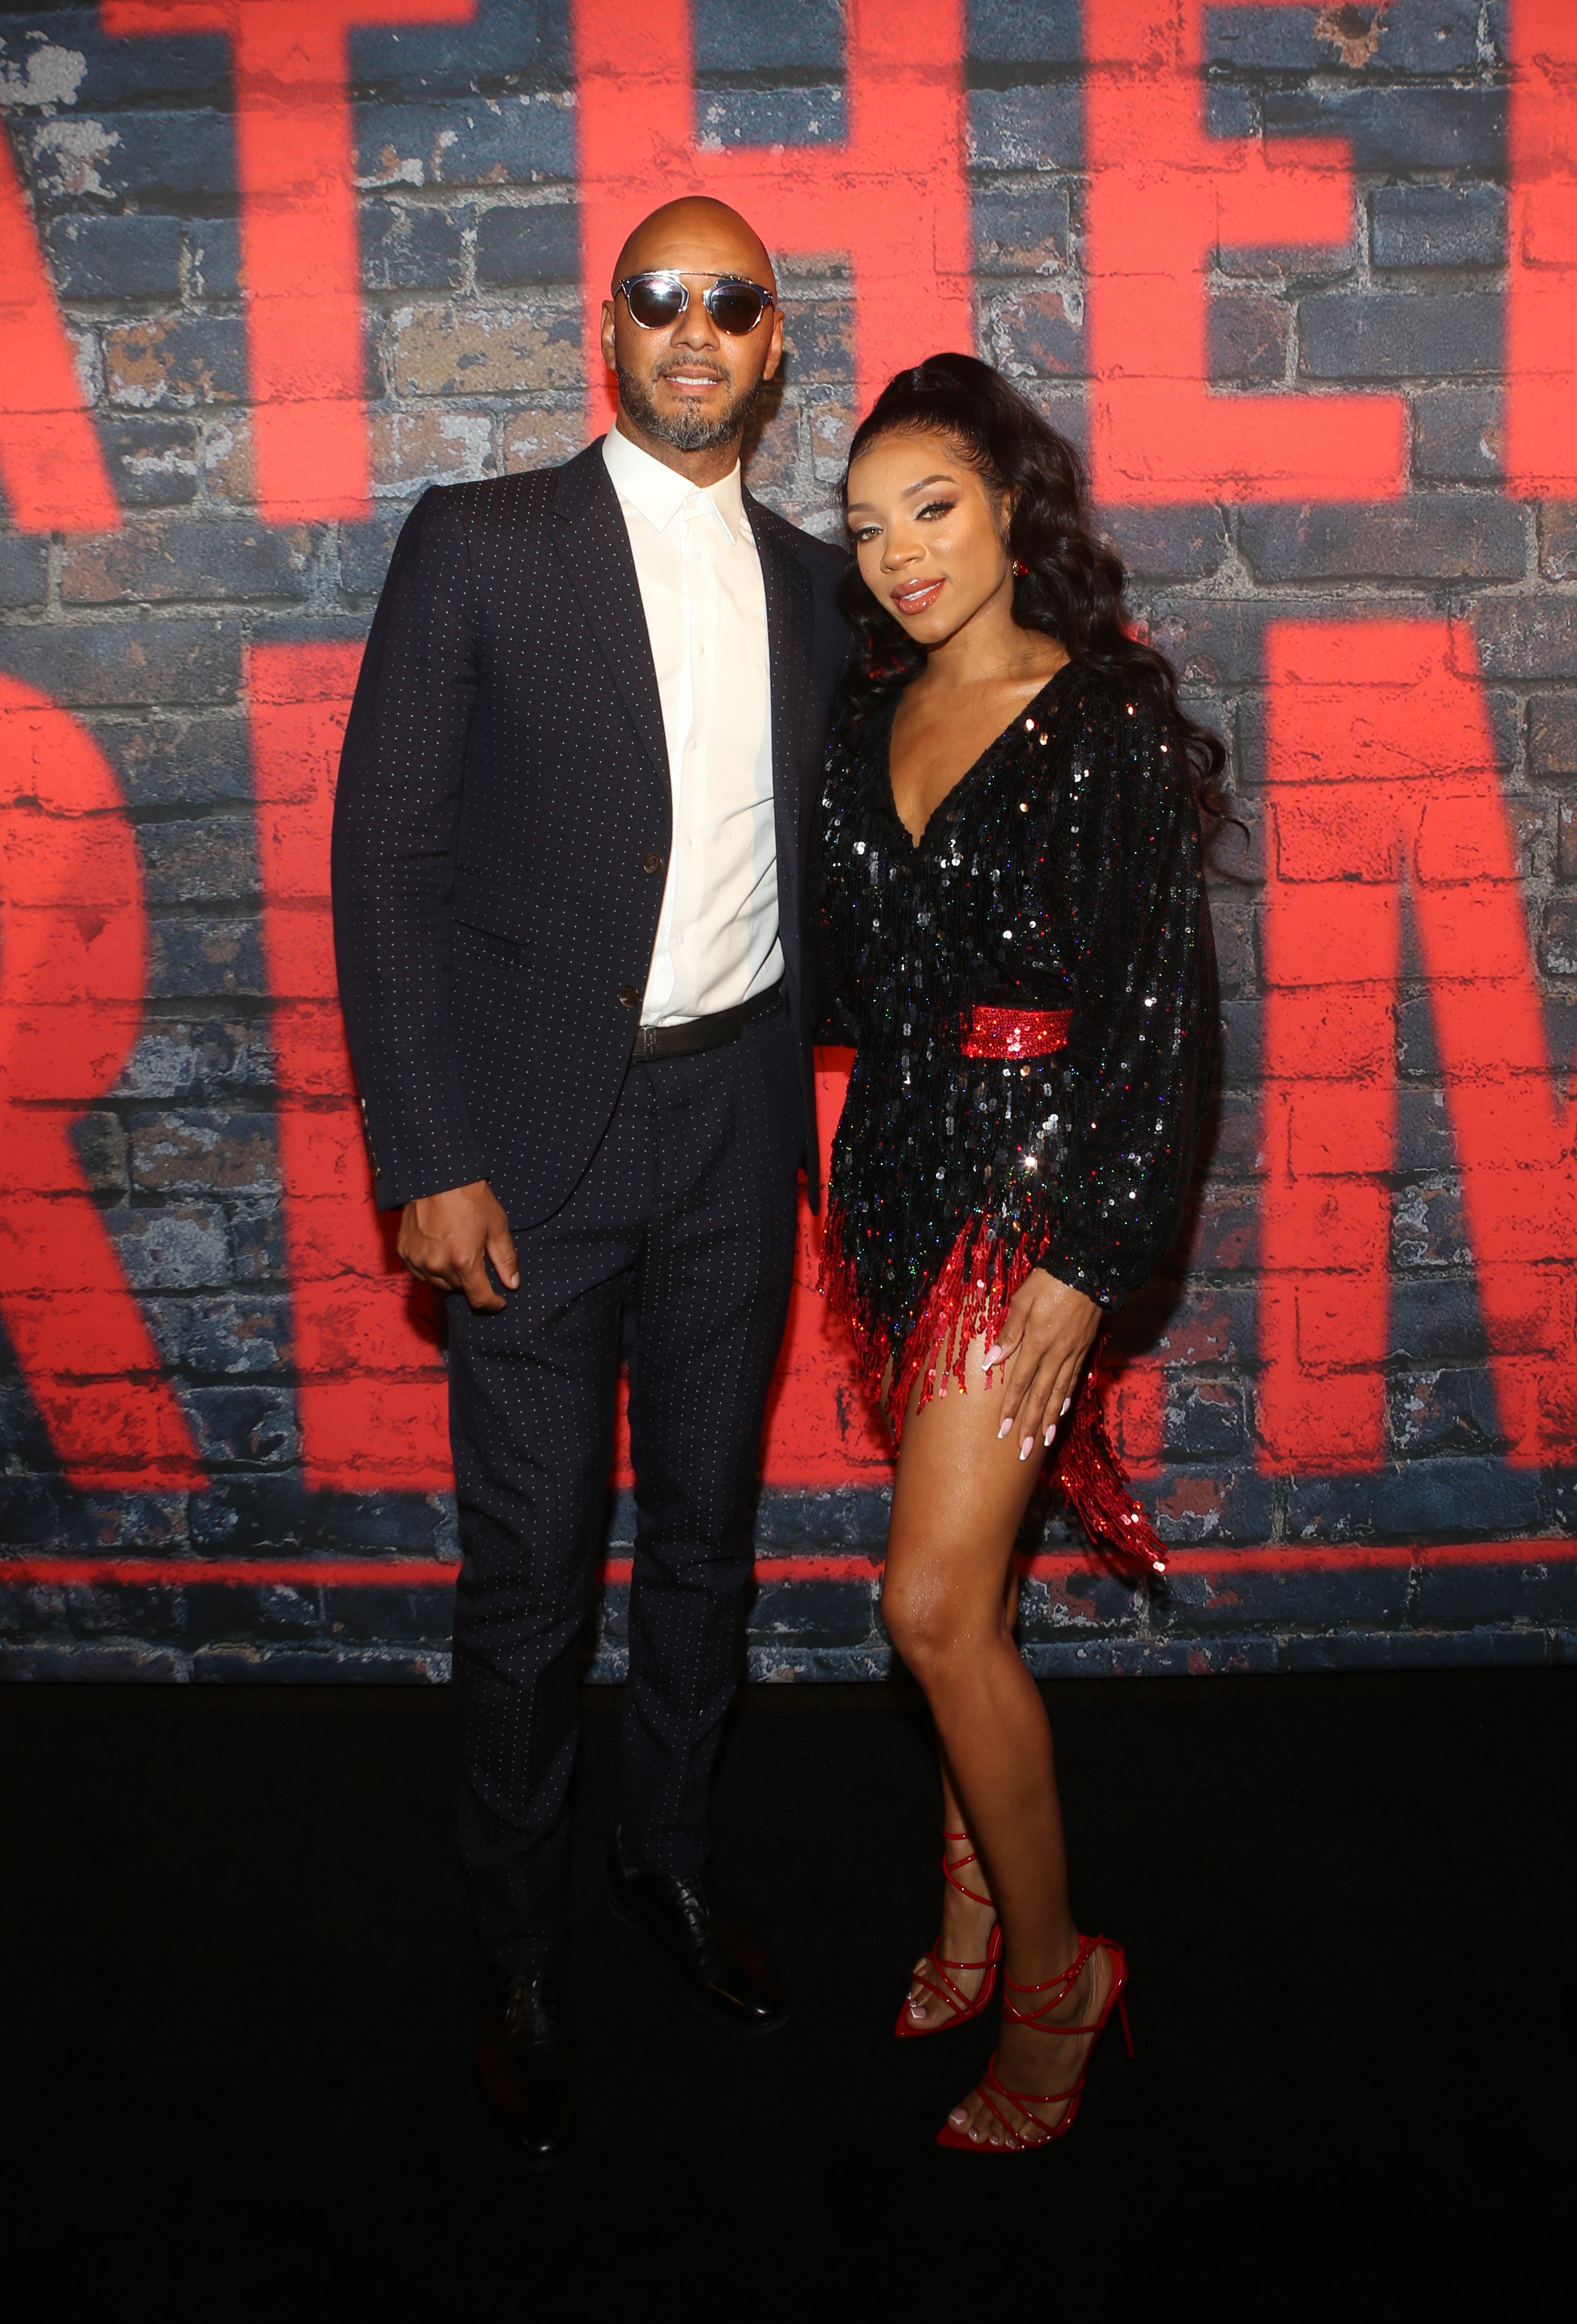 Swizz Beatz and Lil Mama at the Godfather Of Harlem Screening at the Apollo